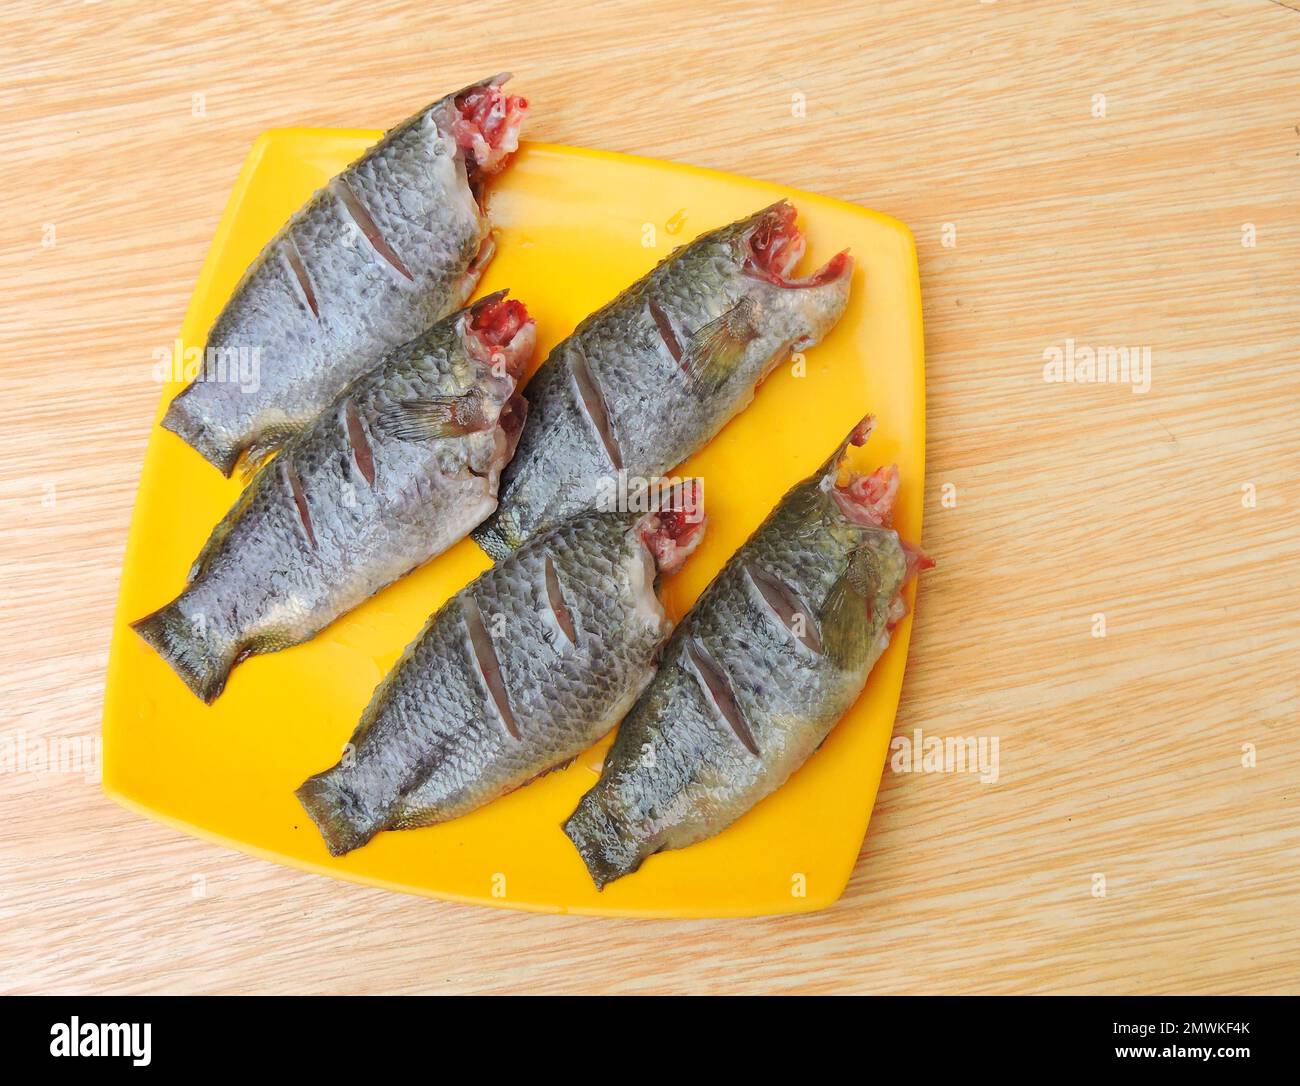 Climbing perch is a fresh water fish native to Asia. It can crawl without water from one place to another. Stock Photo